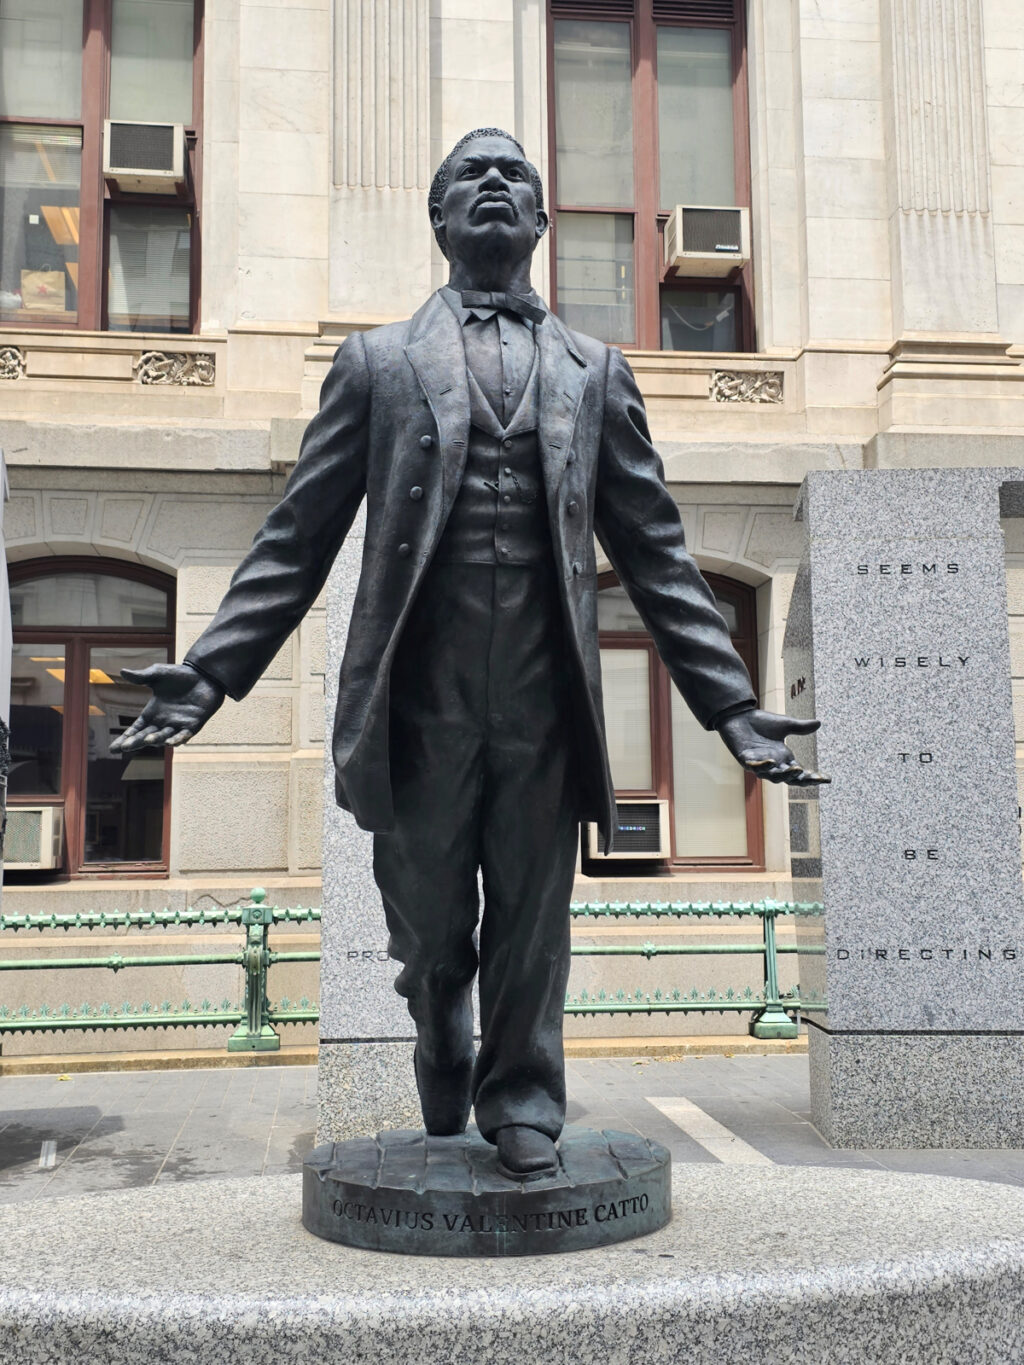 Statue of Catto in formal wear and bowtie with arms outstretched beside a rectangular column reading "seems wisely to be directing"